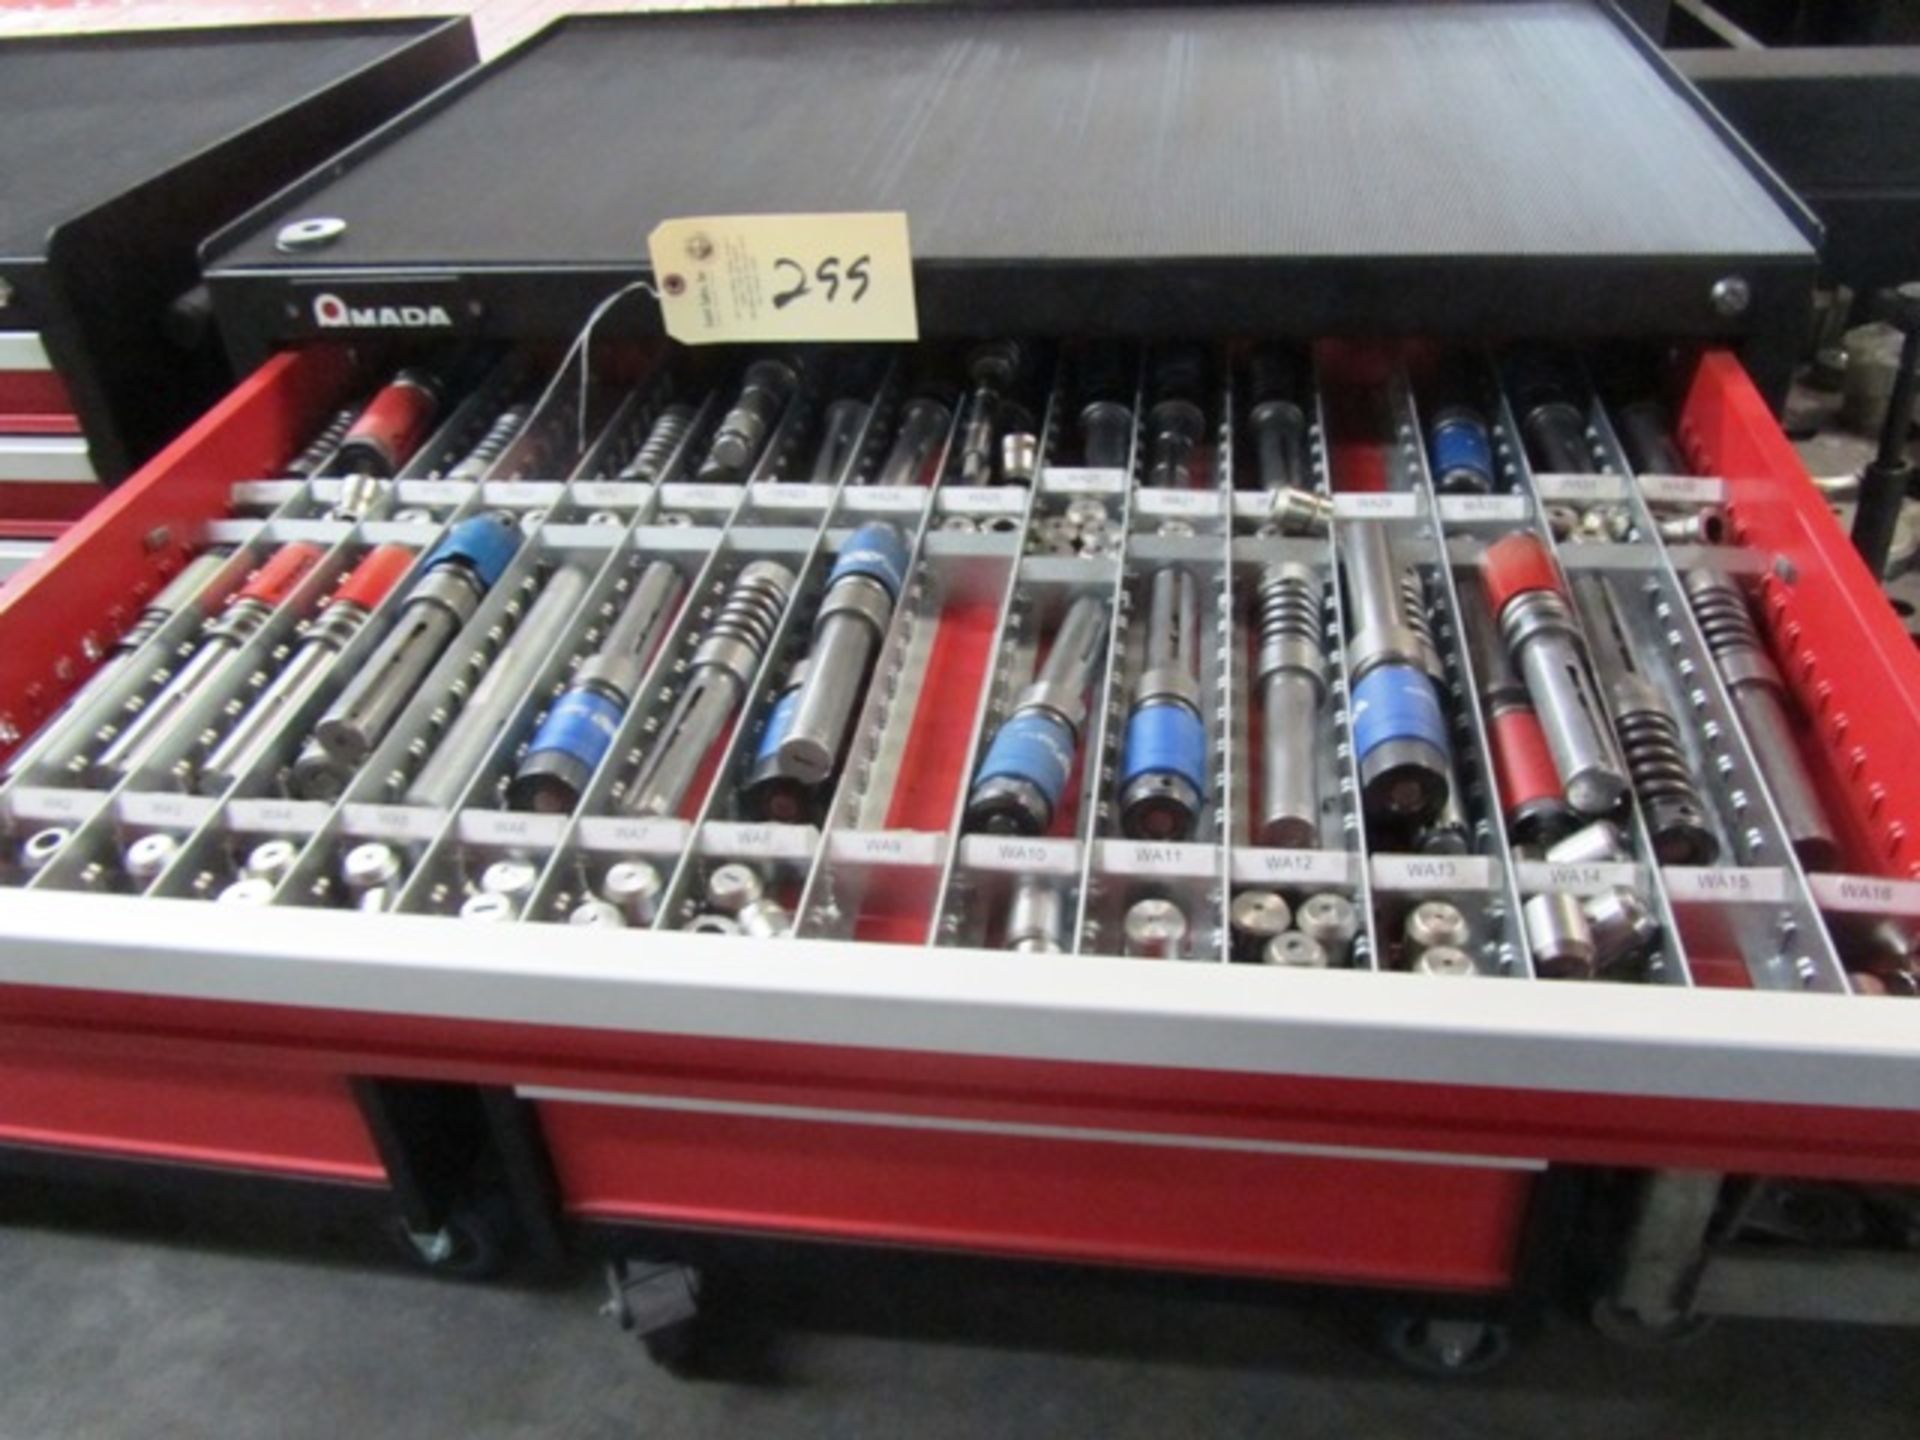 Amada 8 Drawer Portable Tool Cabinet with Turret Punches & Dies - Image 2 of 7